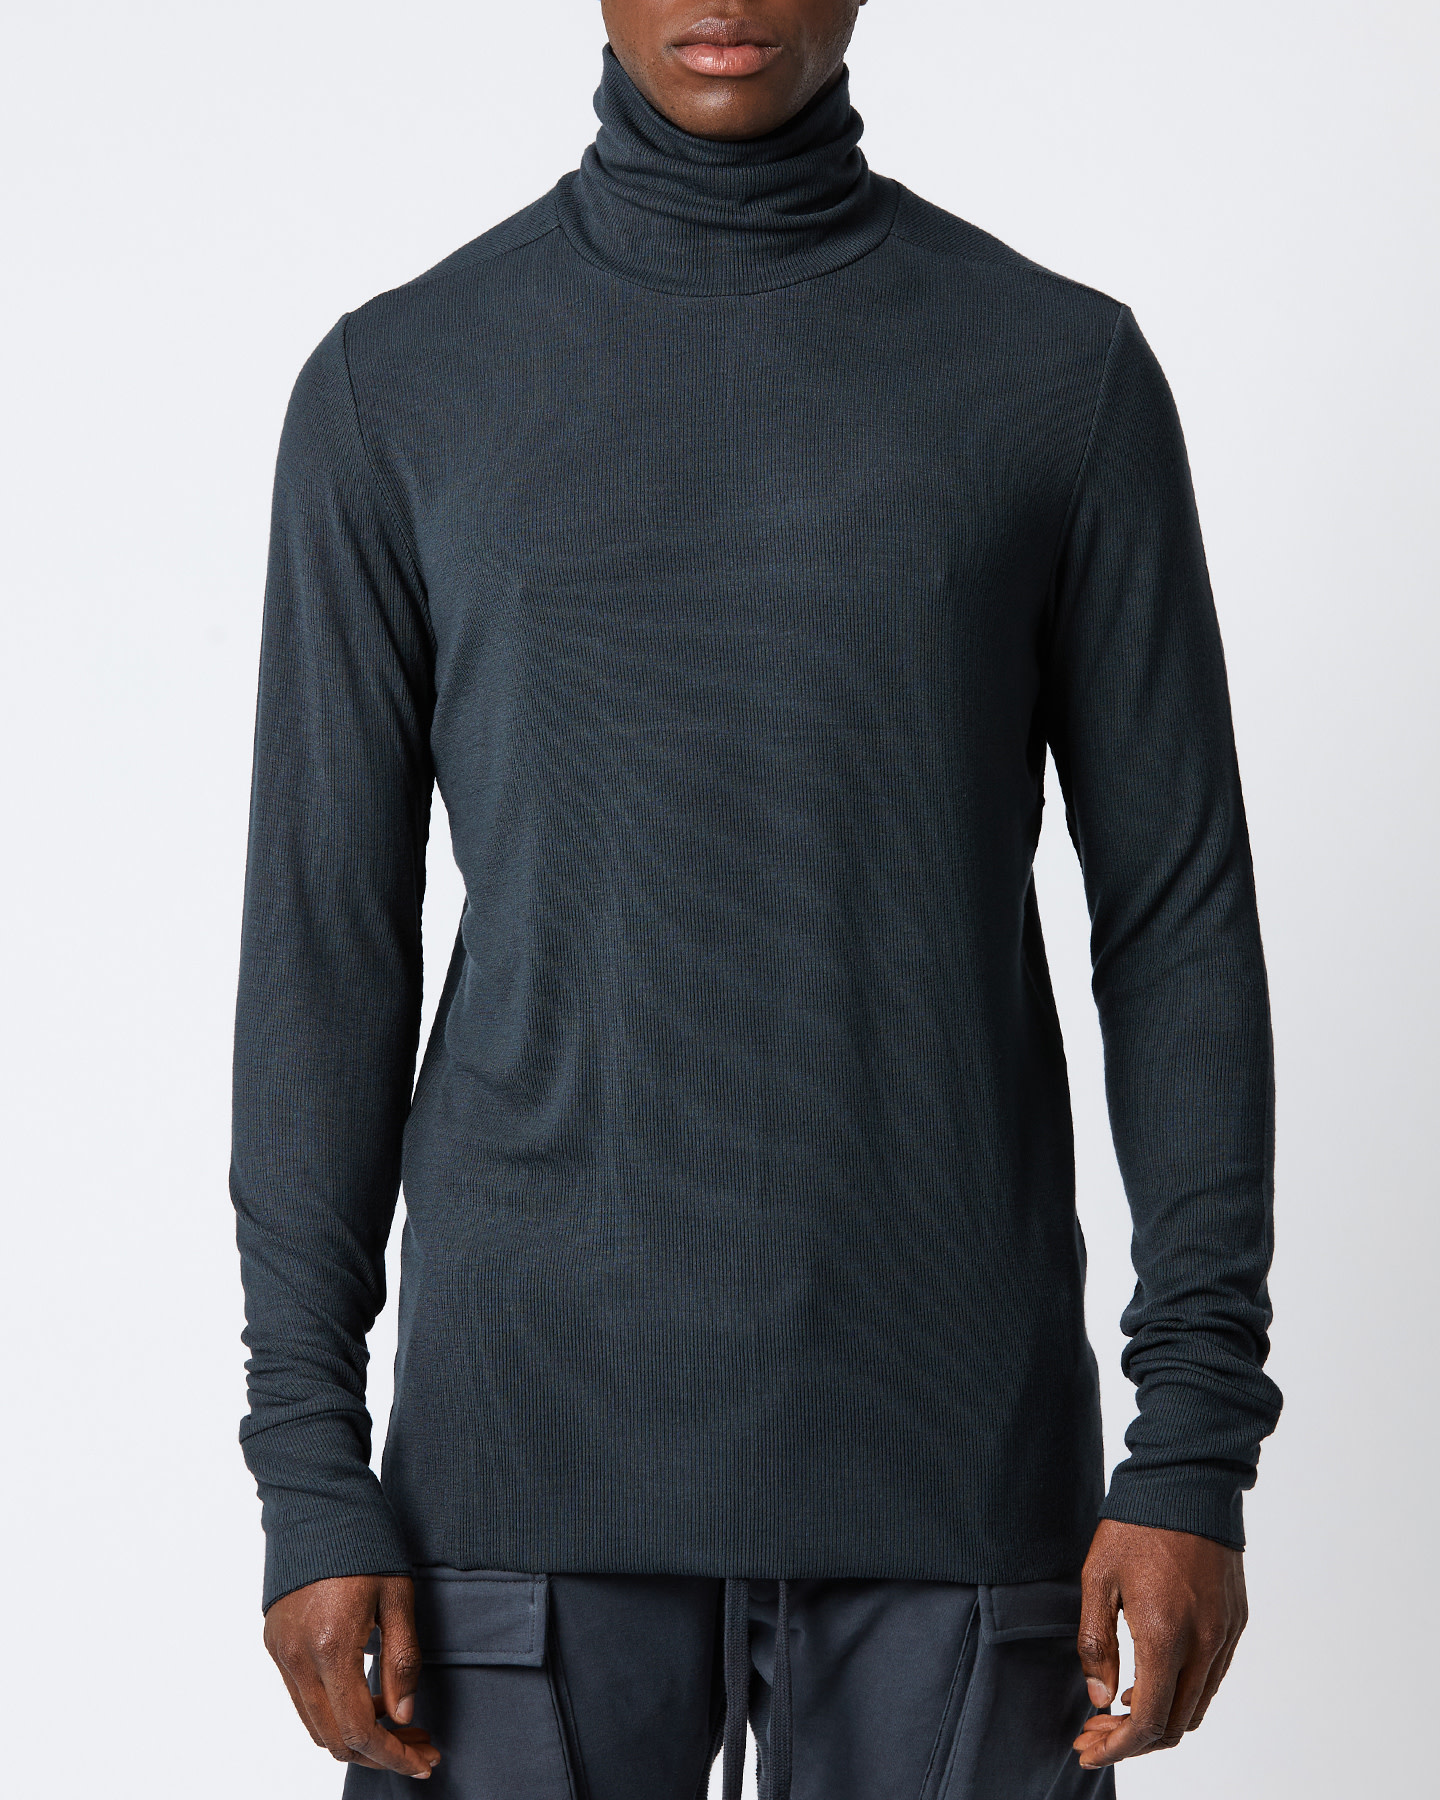 RIBBED MODAL FITTED TURTLENECK - FOREST